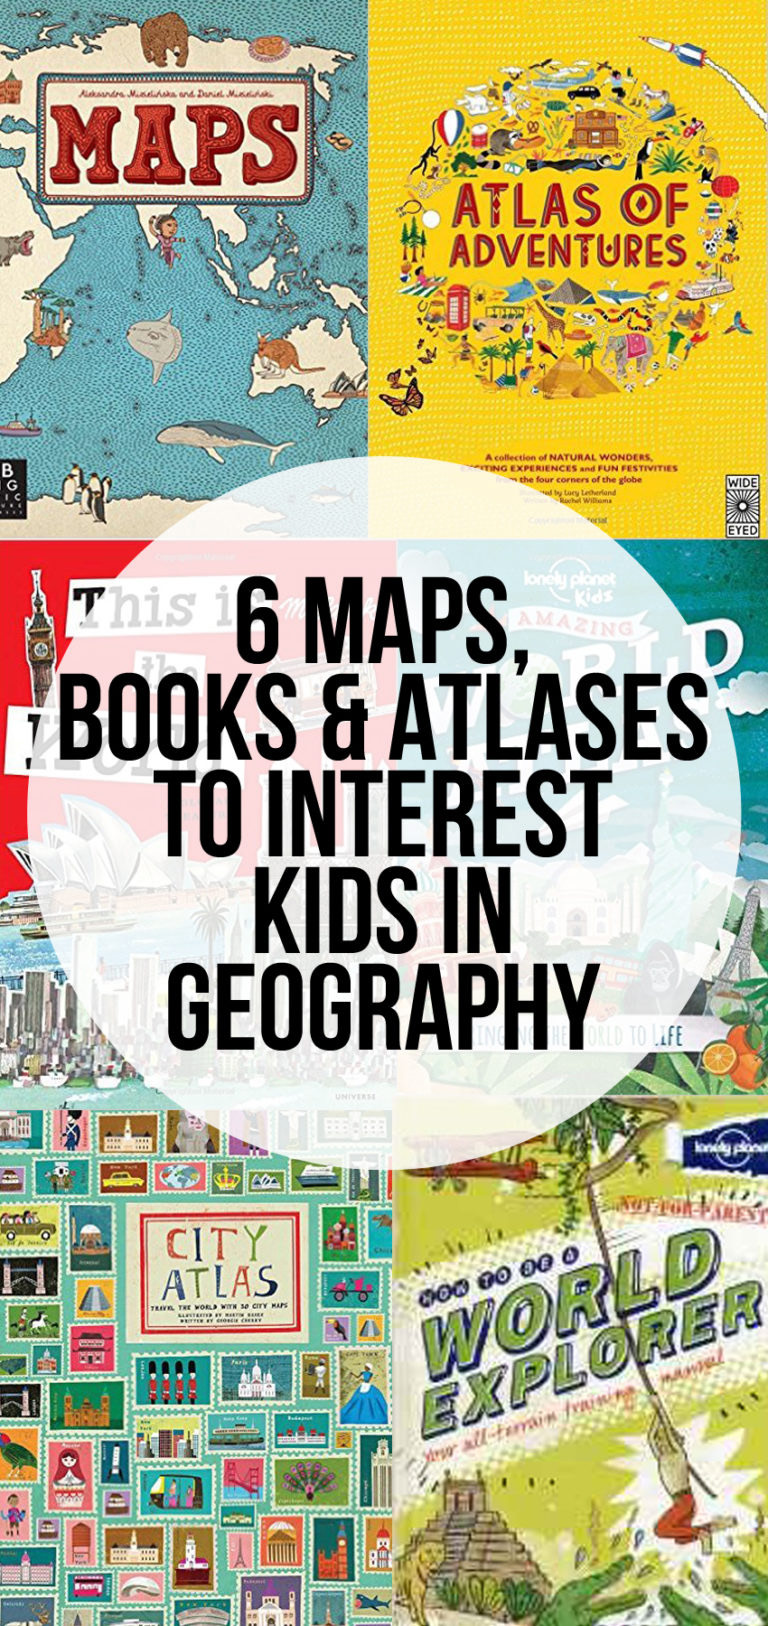 The Best Maps, Books and Atlases to Interest Kids in Geography